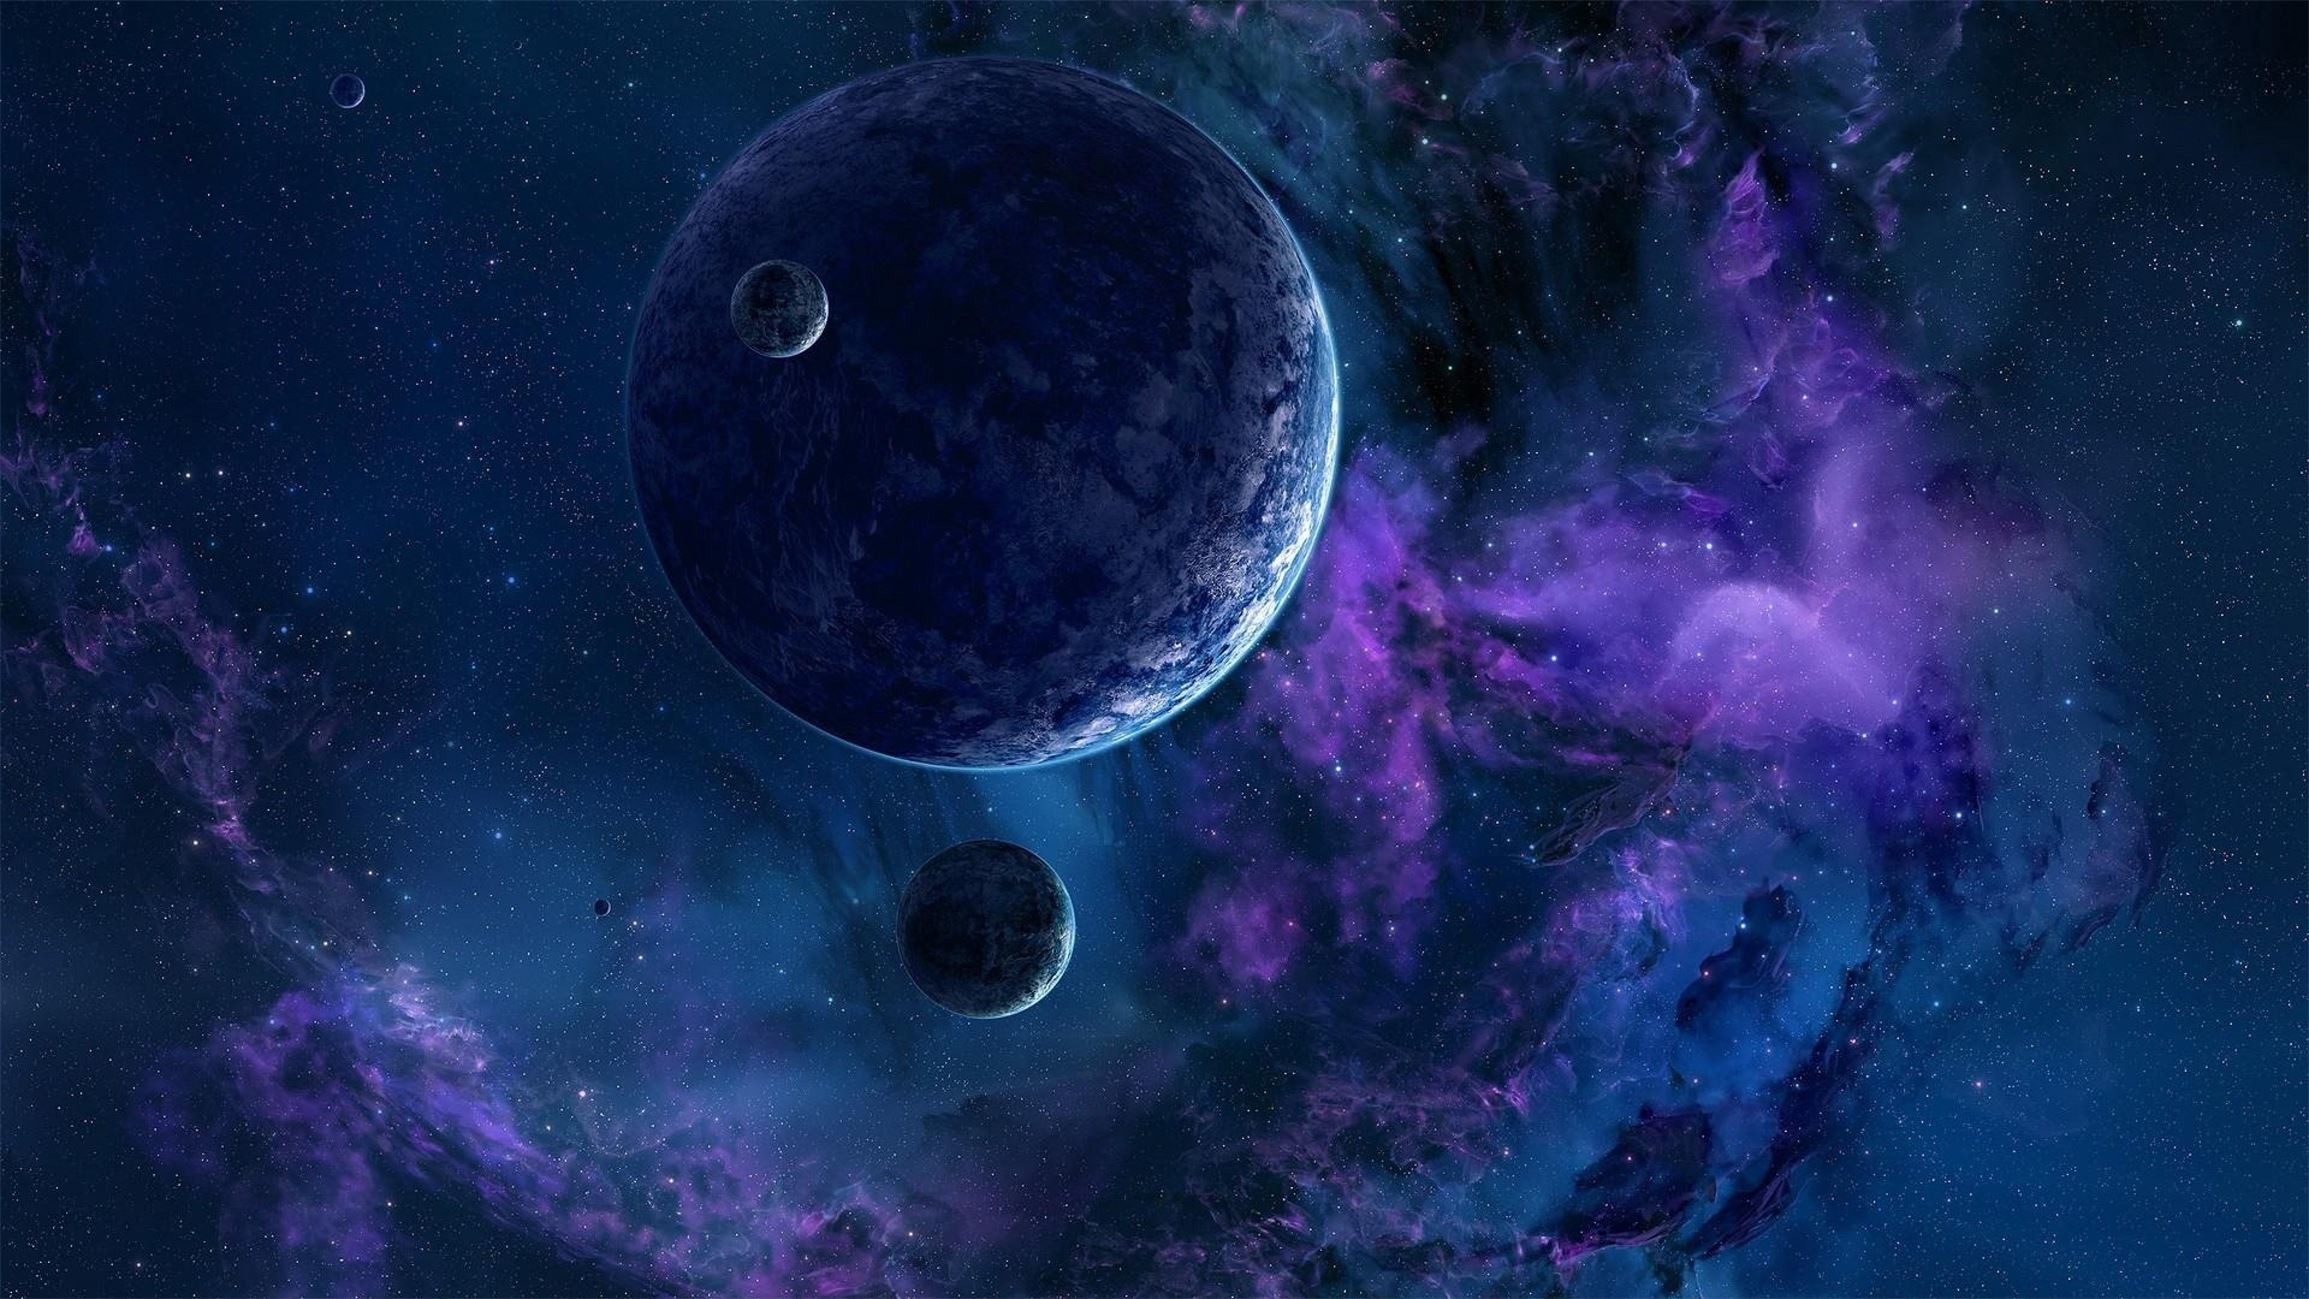 Universe Ultra HD Wallpaper https://wallpapers-and-backgrounds.net/